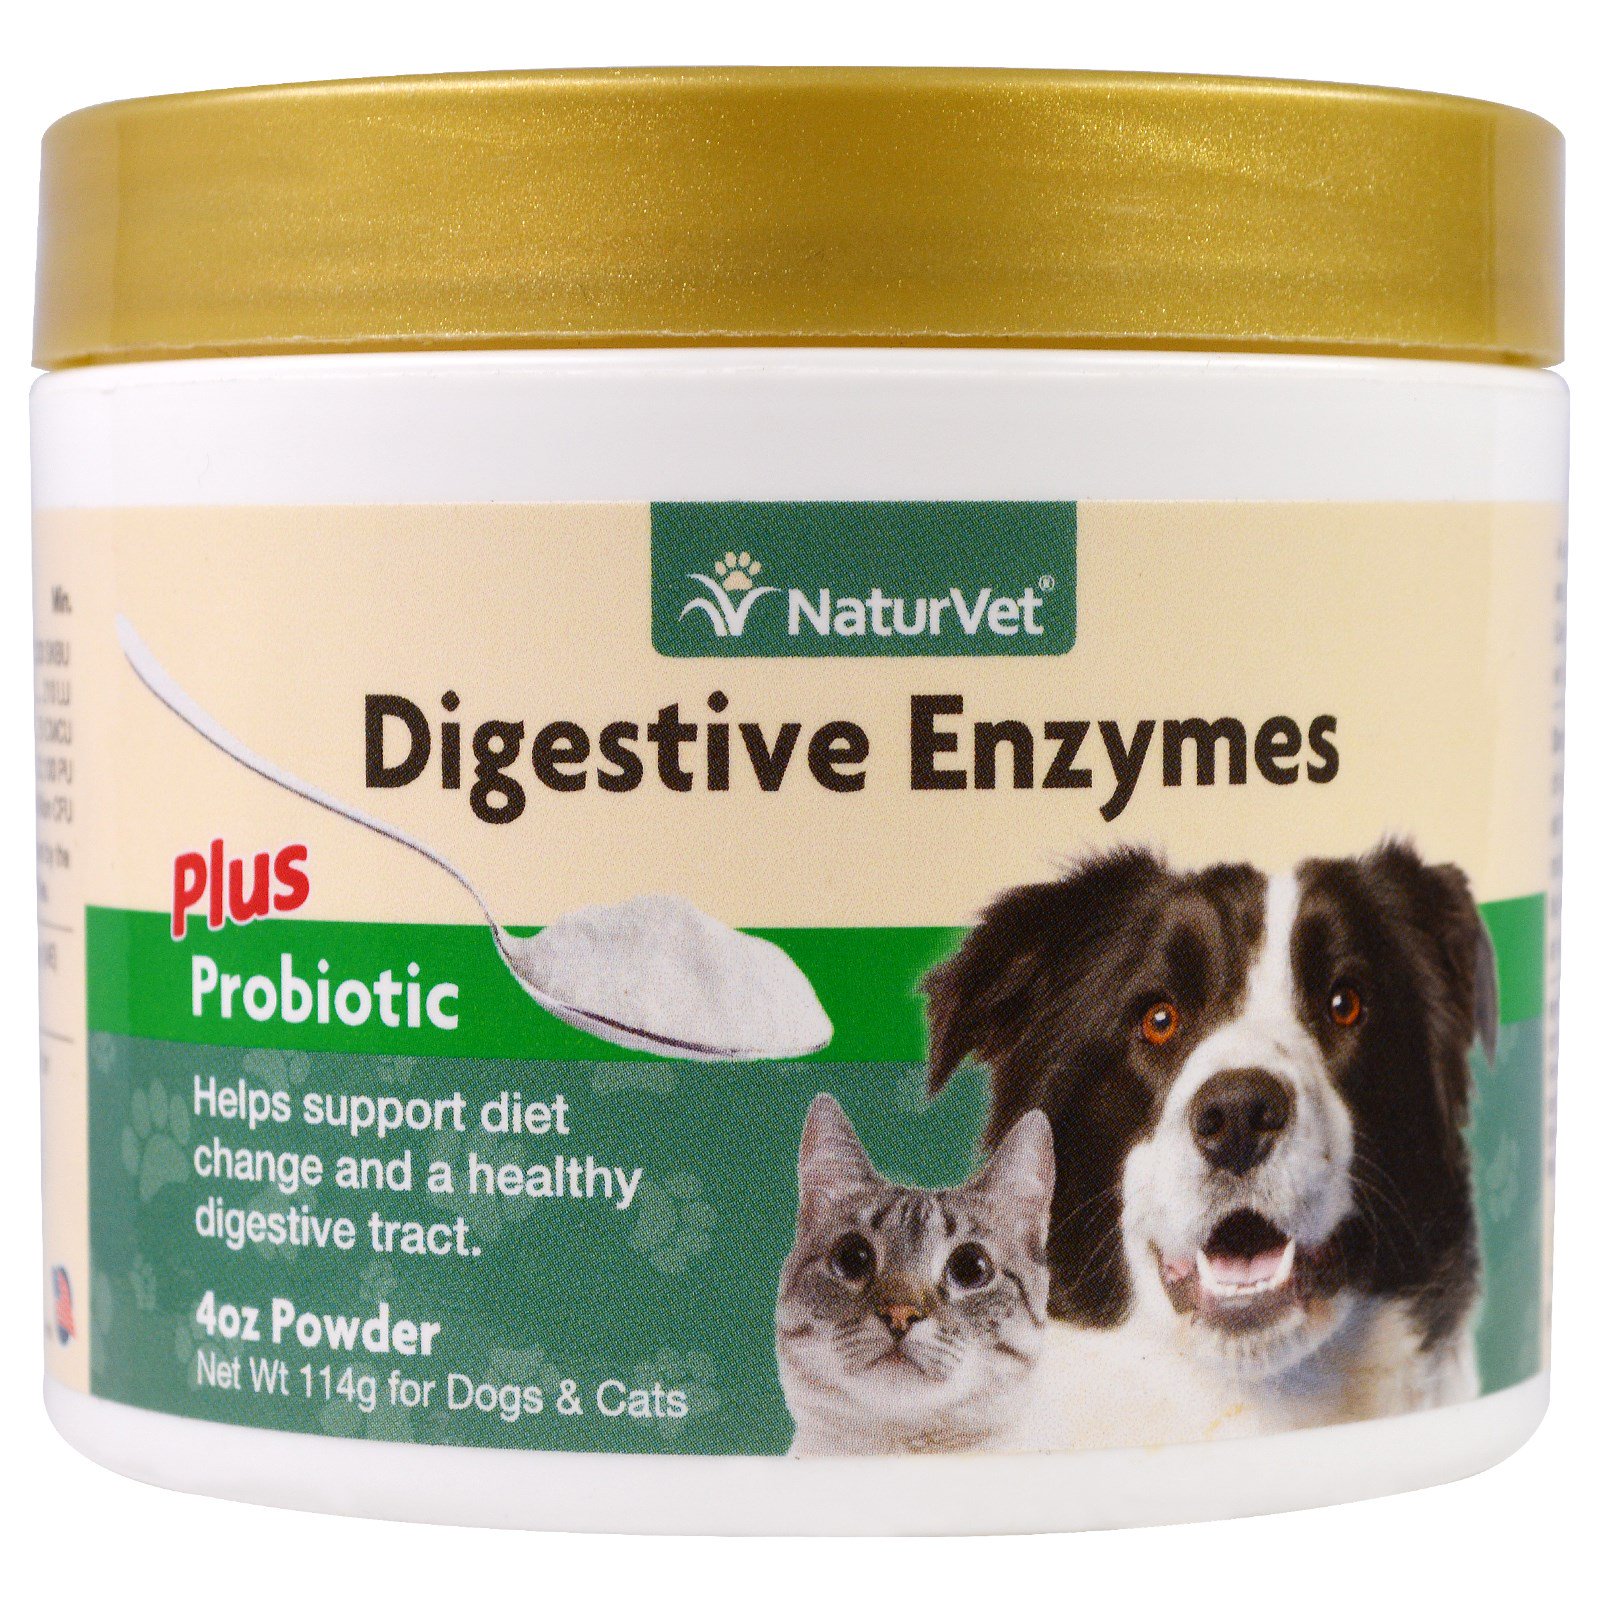 NaturVet, Digestive Enzymes Plus Probiotic, For Dogs & Cats , Powder, 4 oz (114 g) iHerb